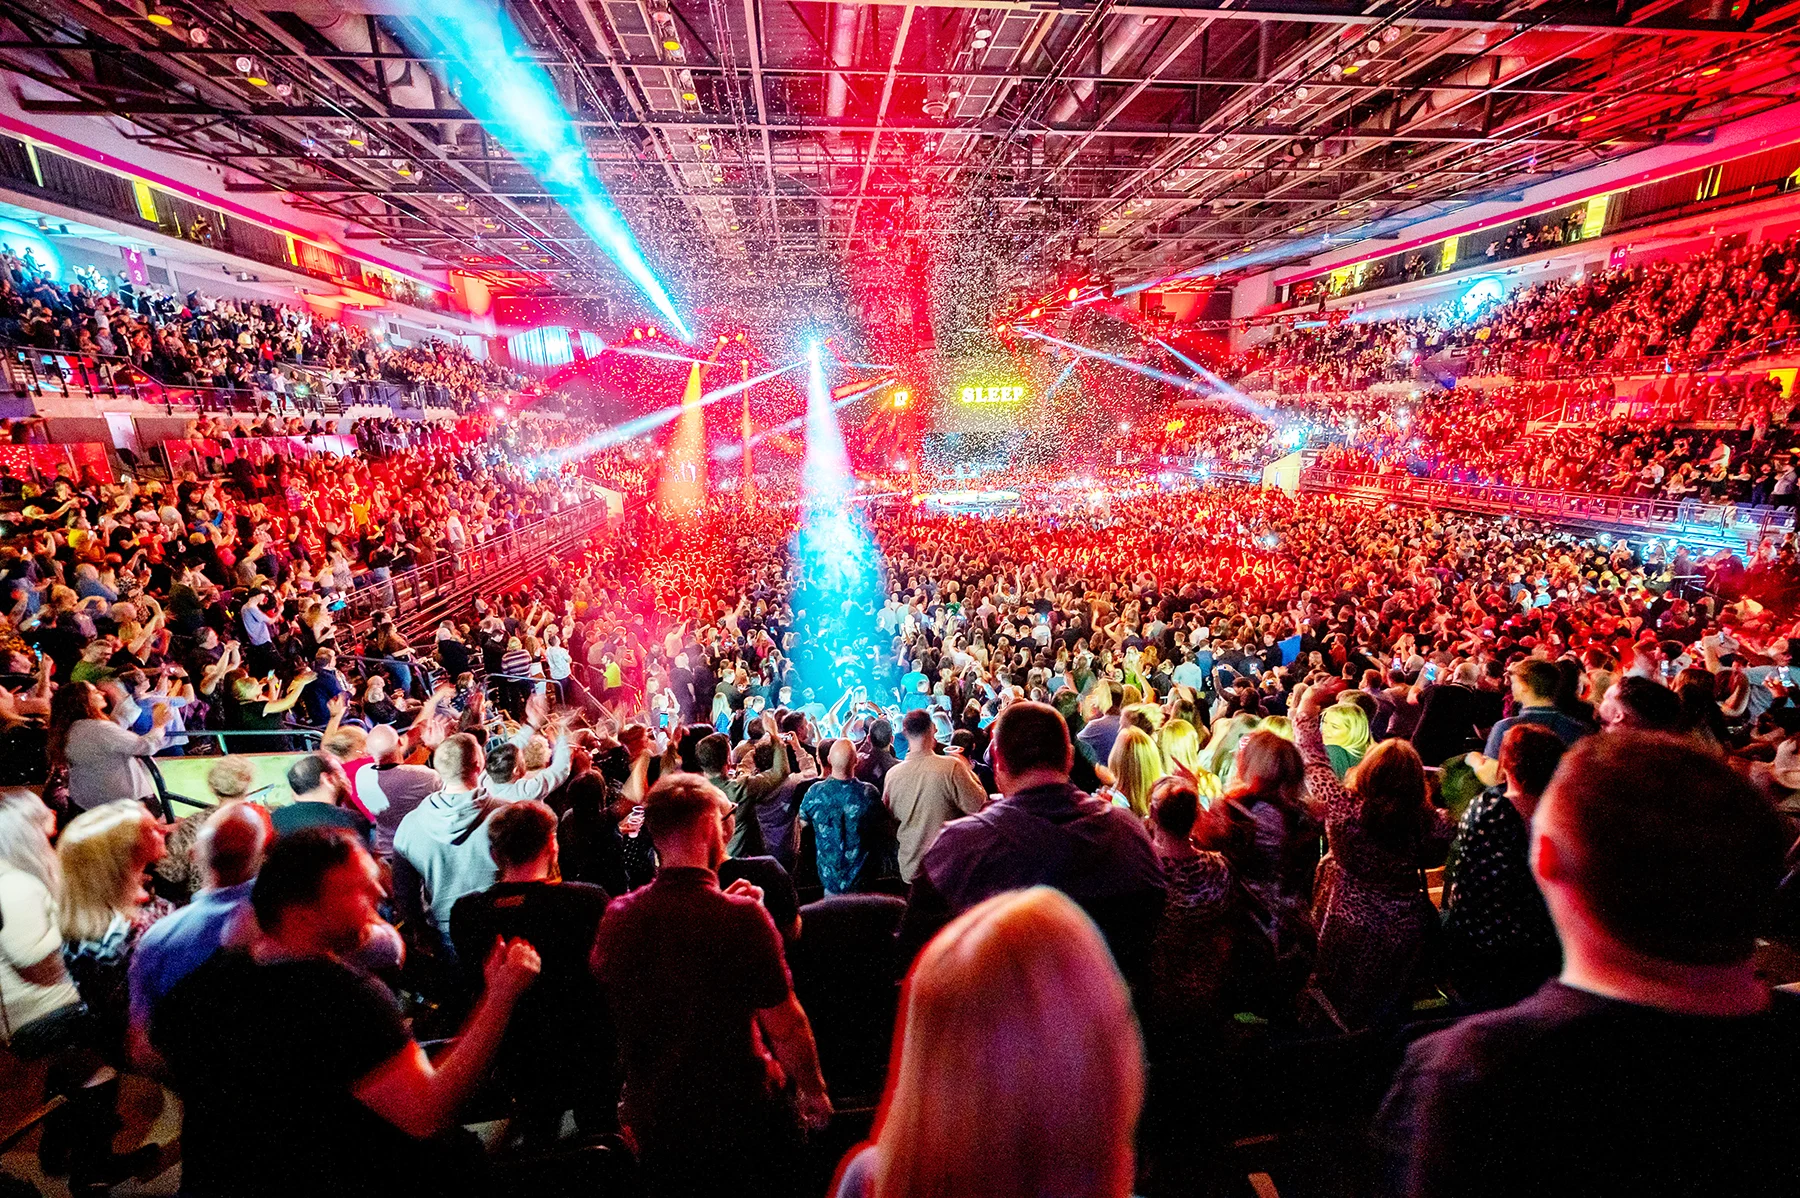 A crowd of people dancing at a concert in an arena with multicoloured lights.